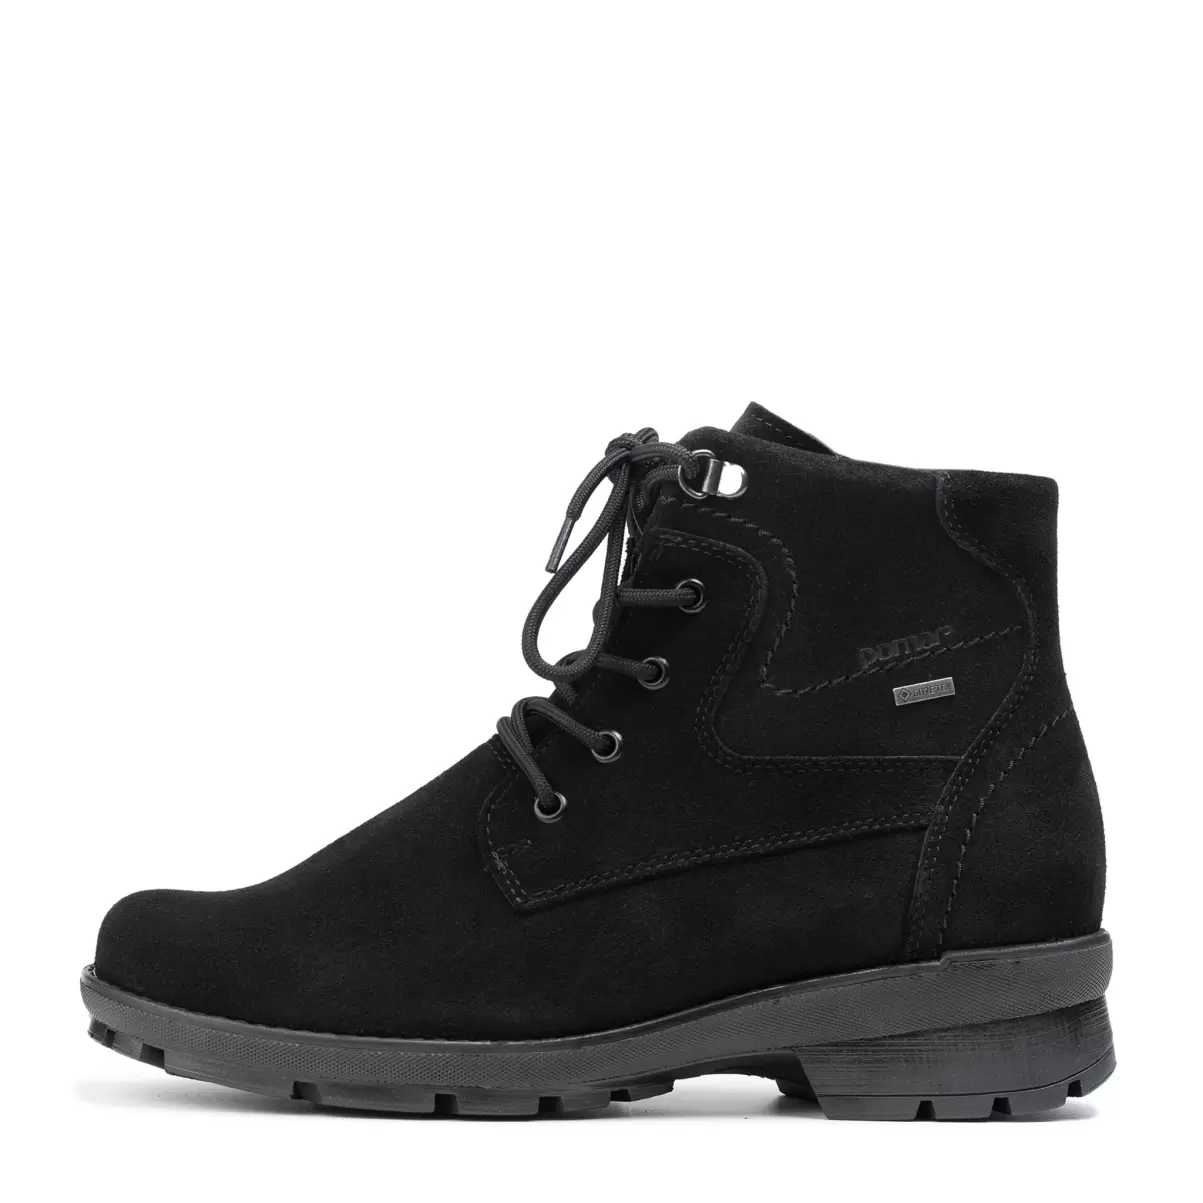 Black Suede/Felt L. Lace-Up Pomarfin Oy Women Piisku Women's Gore-Tex Ankle Boot